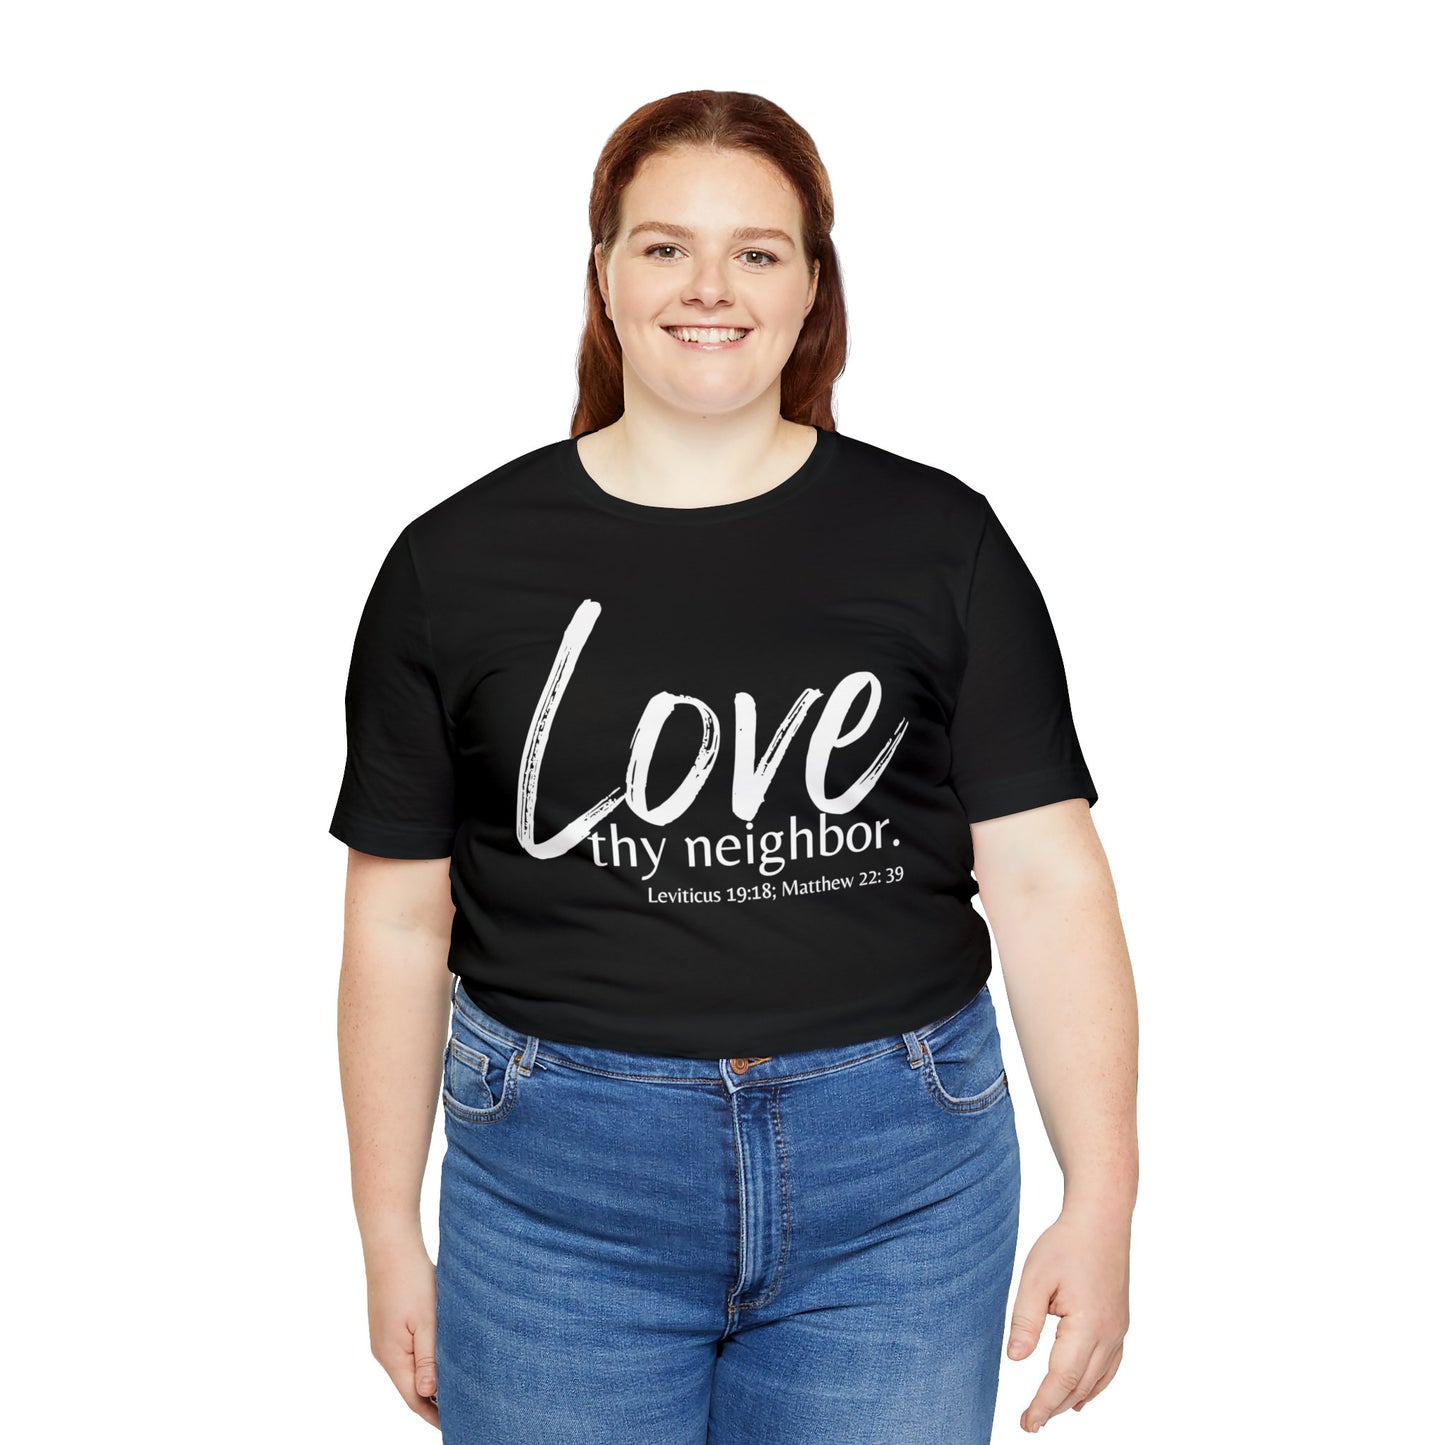 Matthew 22:39 Love thy Neighbor, Express Delivery, Christian T-shirt for Men and Women